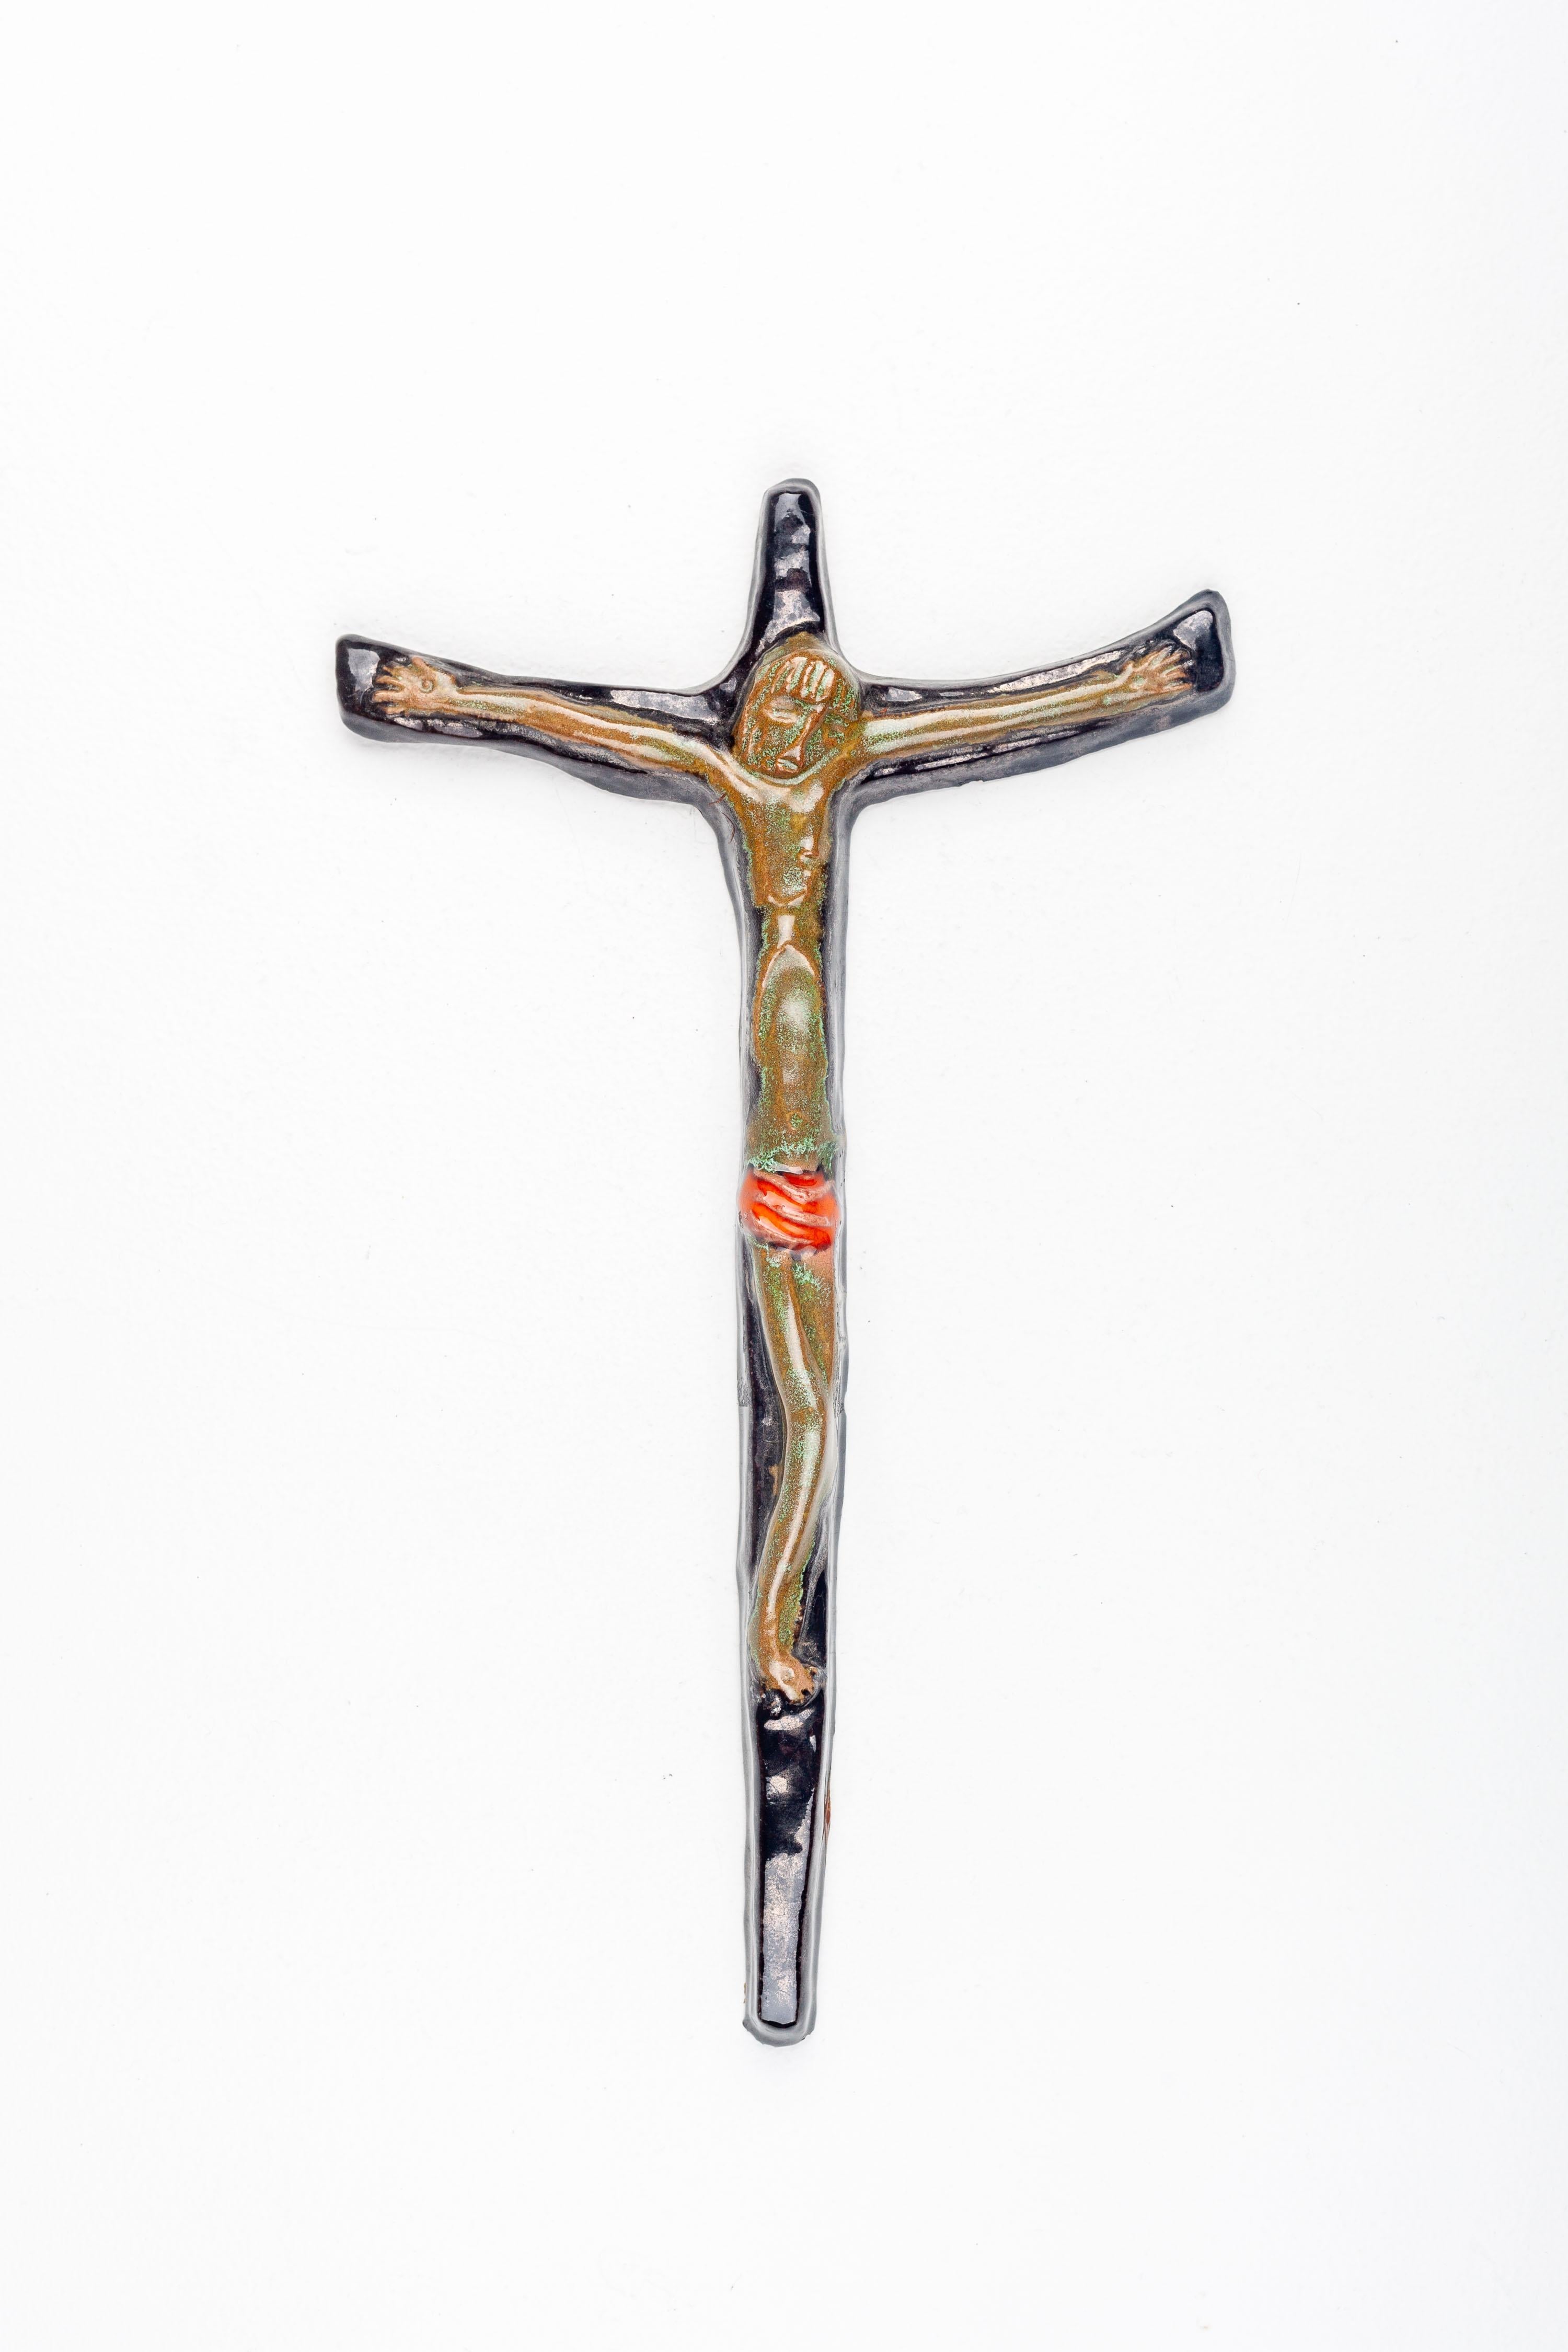 This ceramic wall cross is a distinguished piece of mid-century modern religious art, meticulously handcrafted by European studio pottery artists. The era, known for its clean lines and organic forms, is reflected in the stylized depiction of the